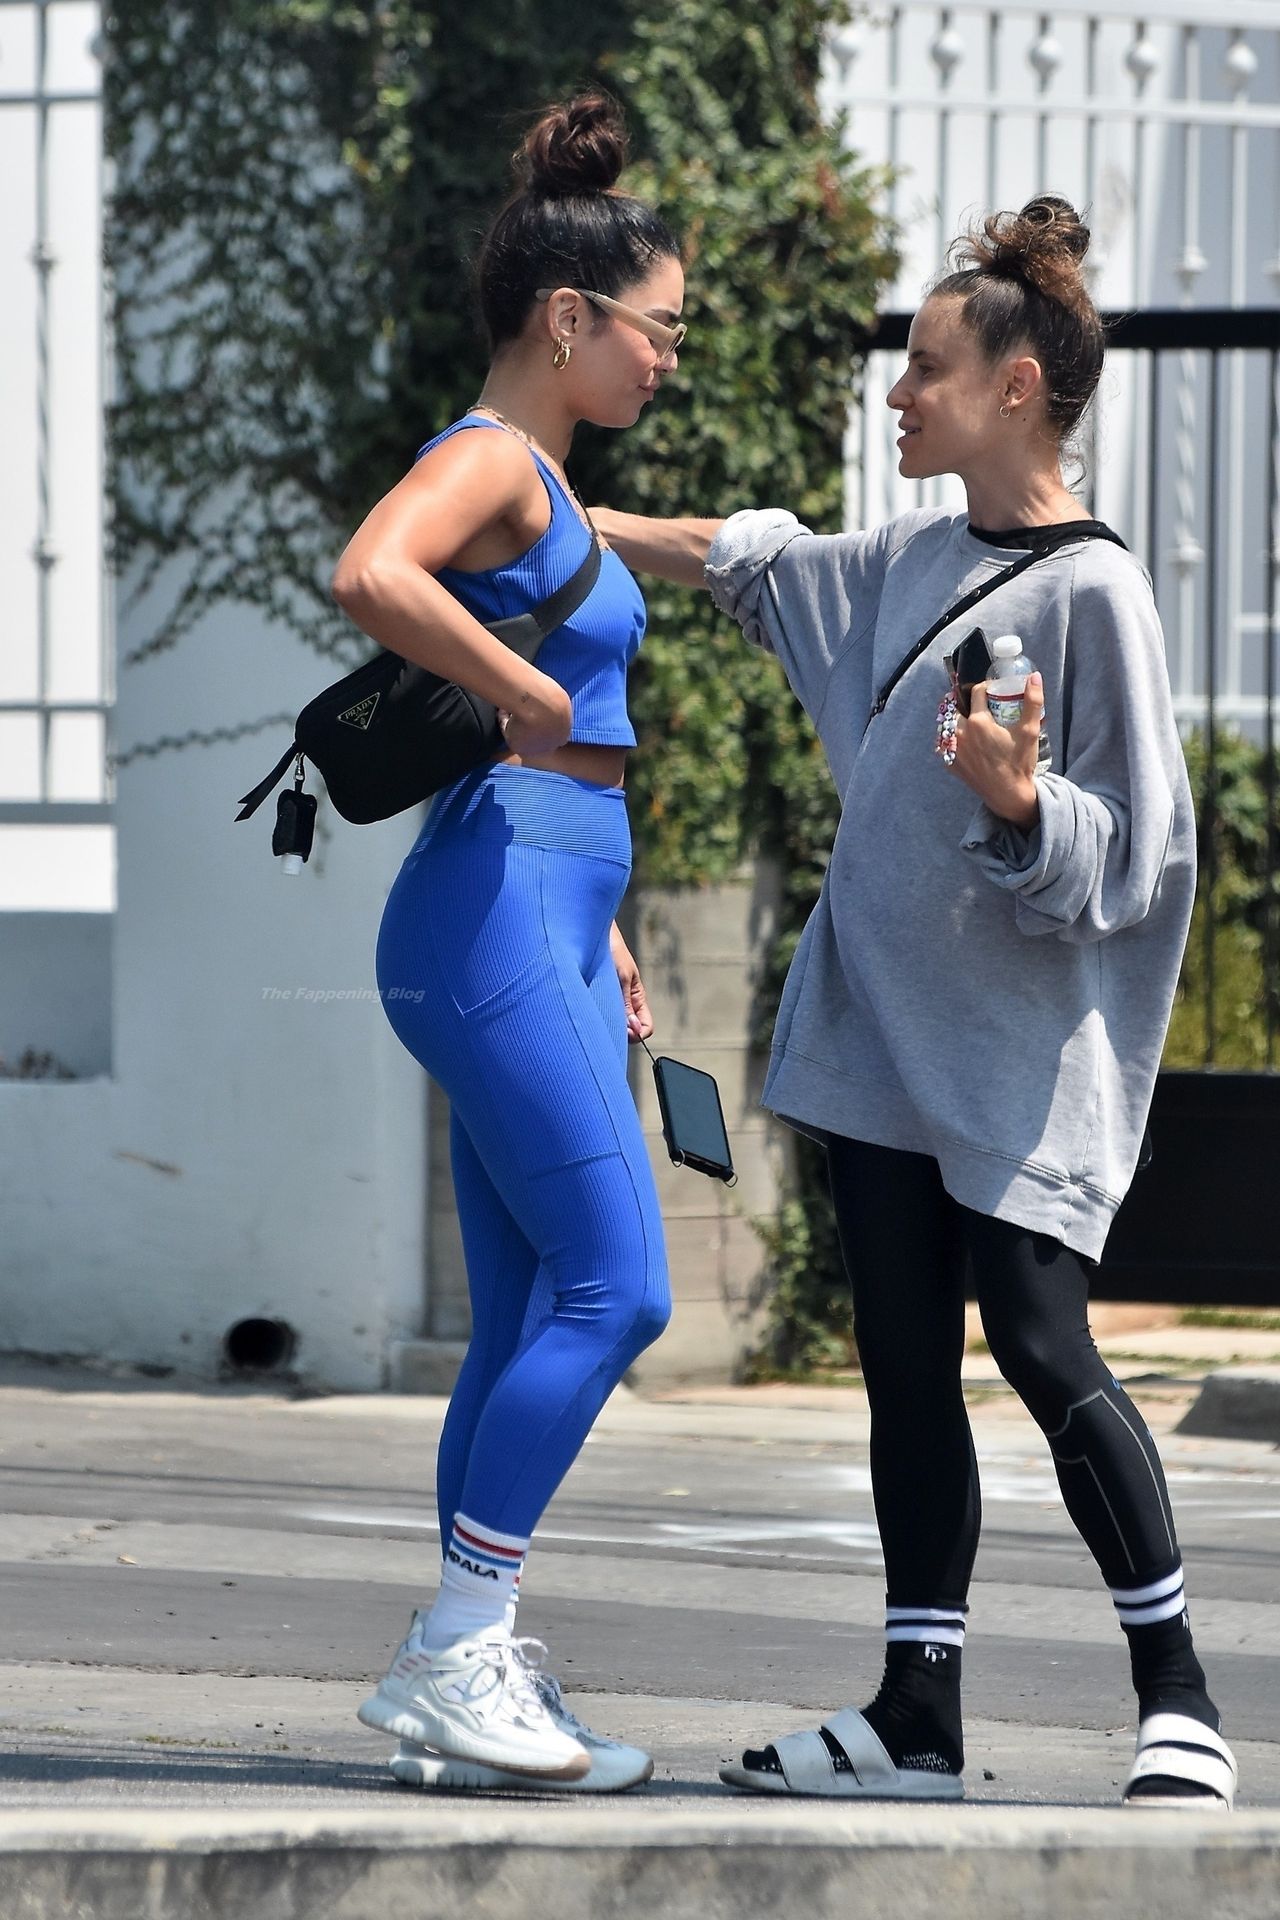 Vanessa Hudgens & GG Magree Team Up For a Morning Workout at Dogpound (151 Photos)